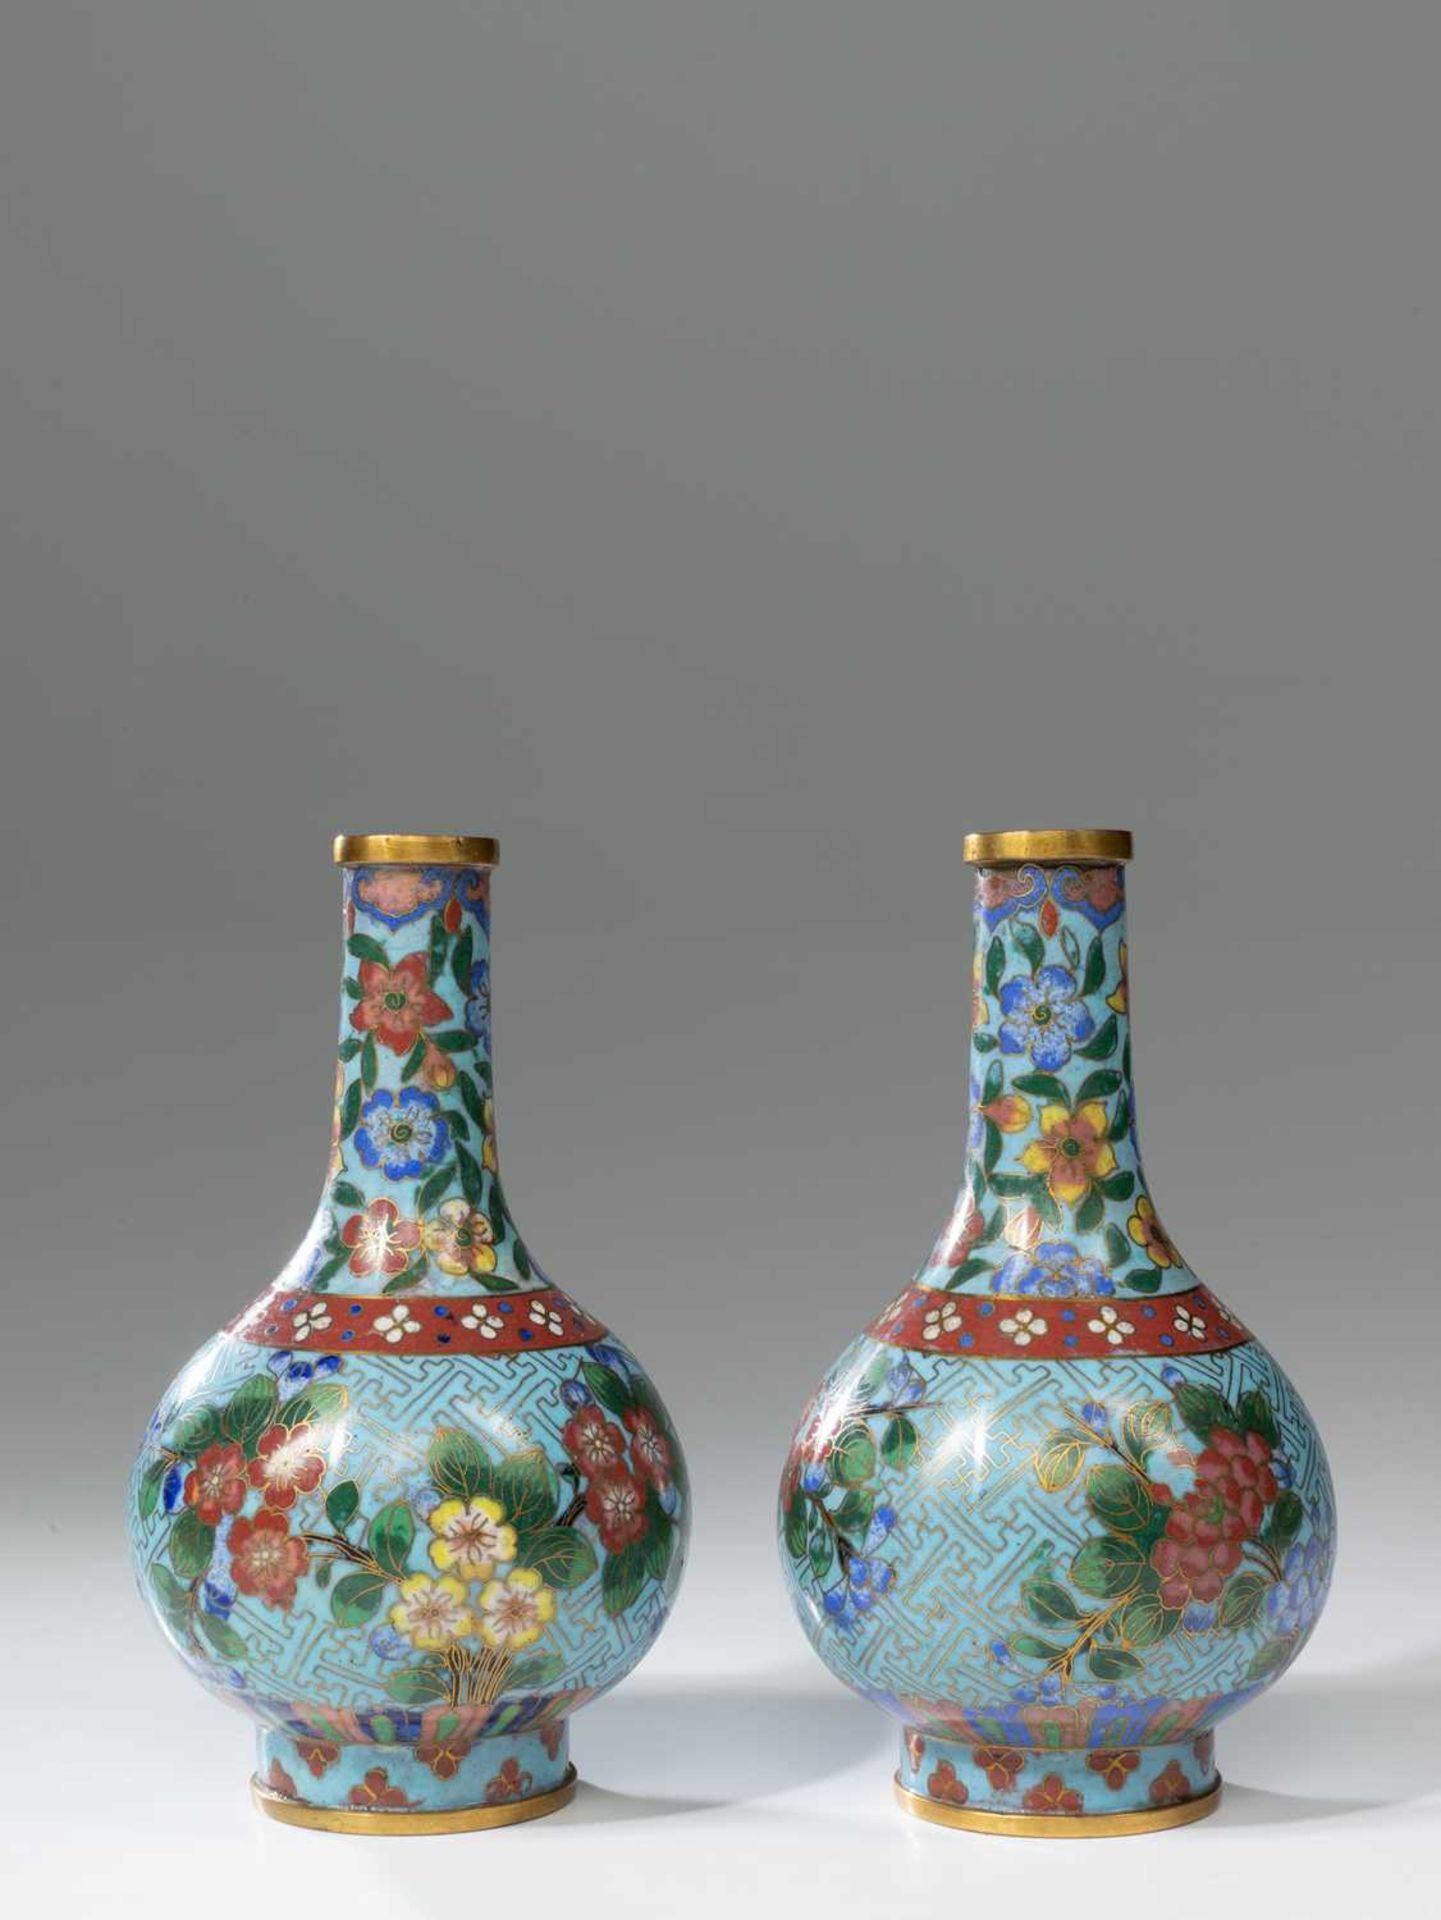 (R) PAIR OF CHINESE CLOISONNE VASES